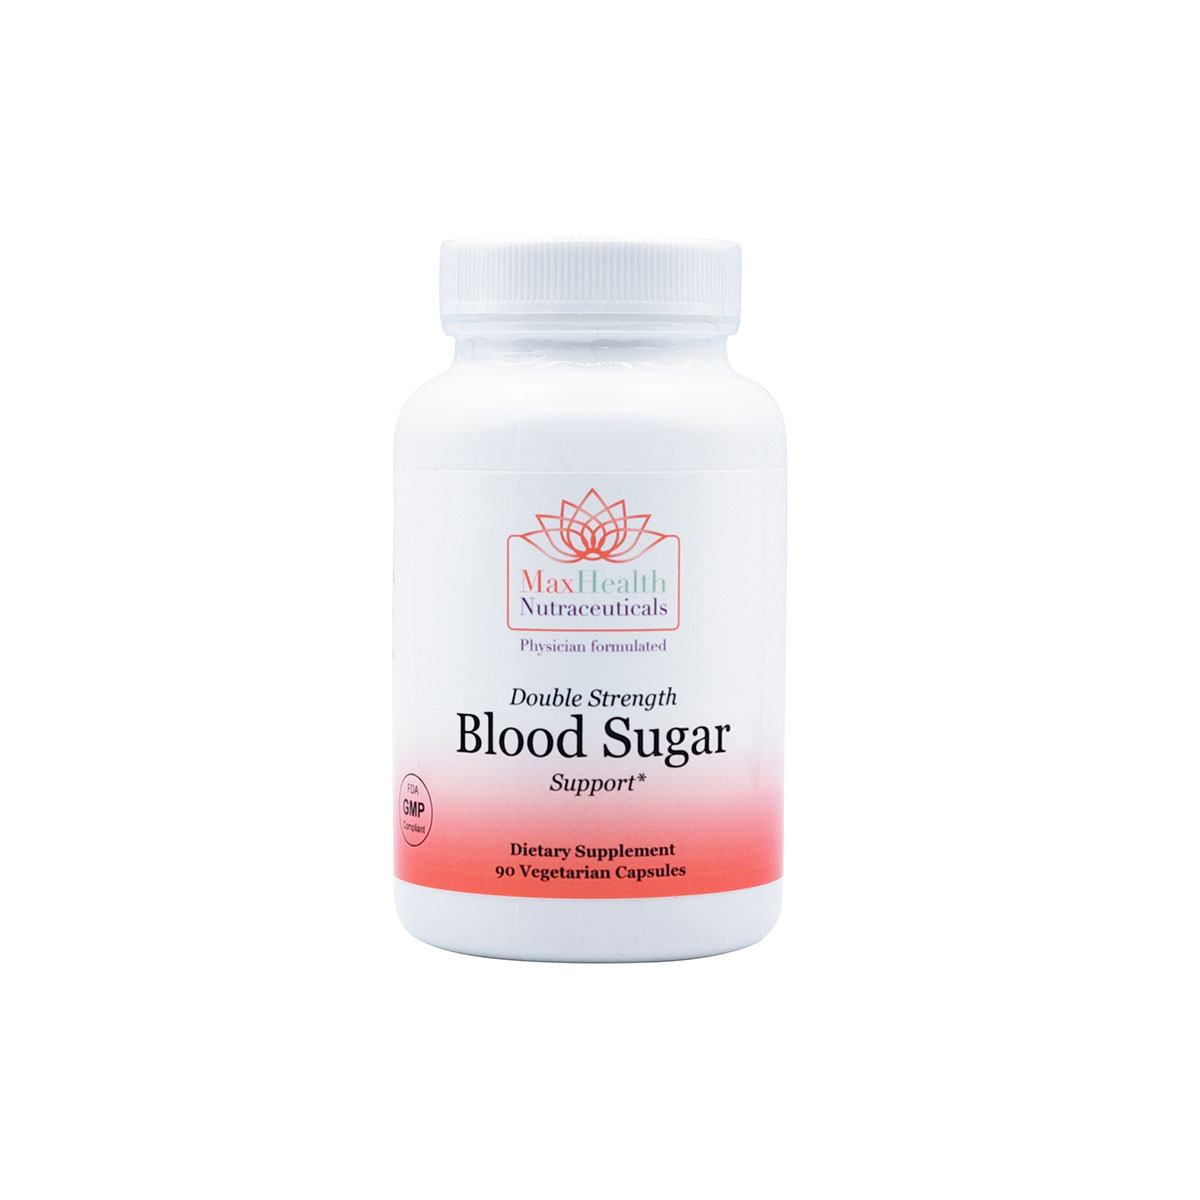 11Double Strength Blood Sugar Support